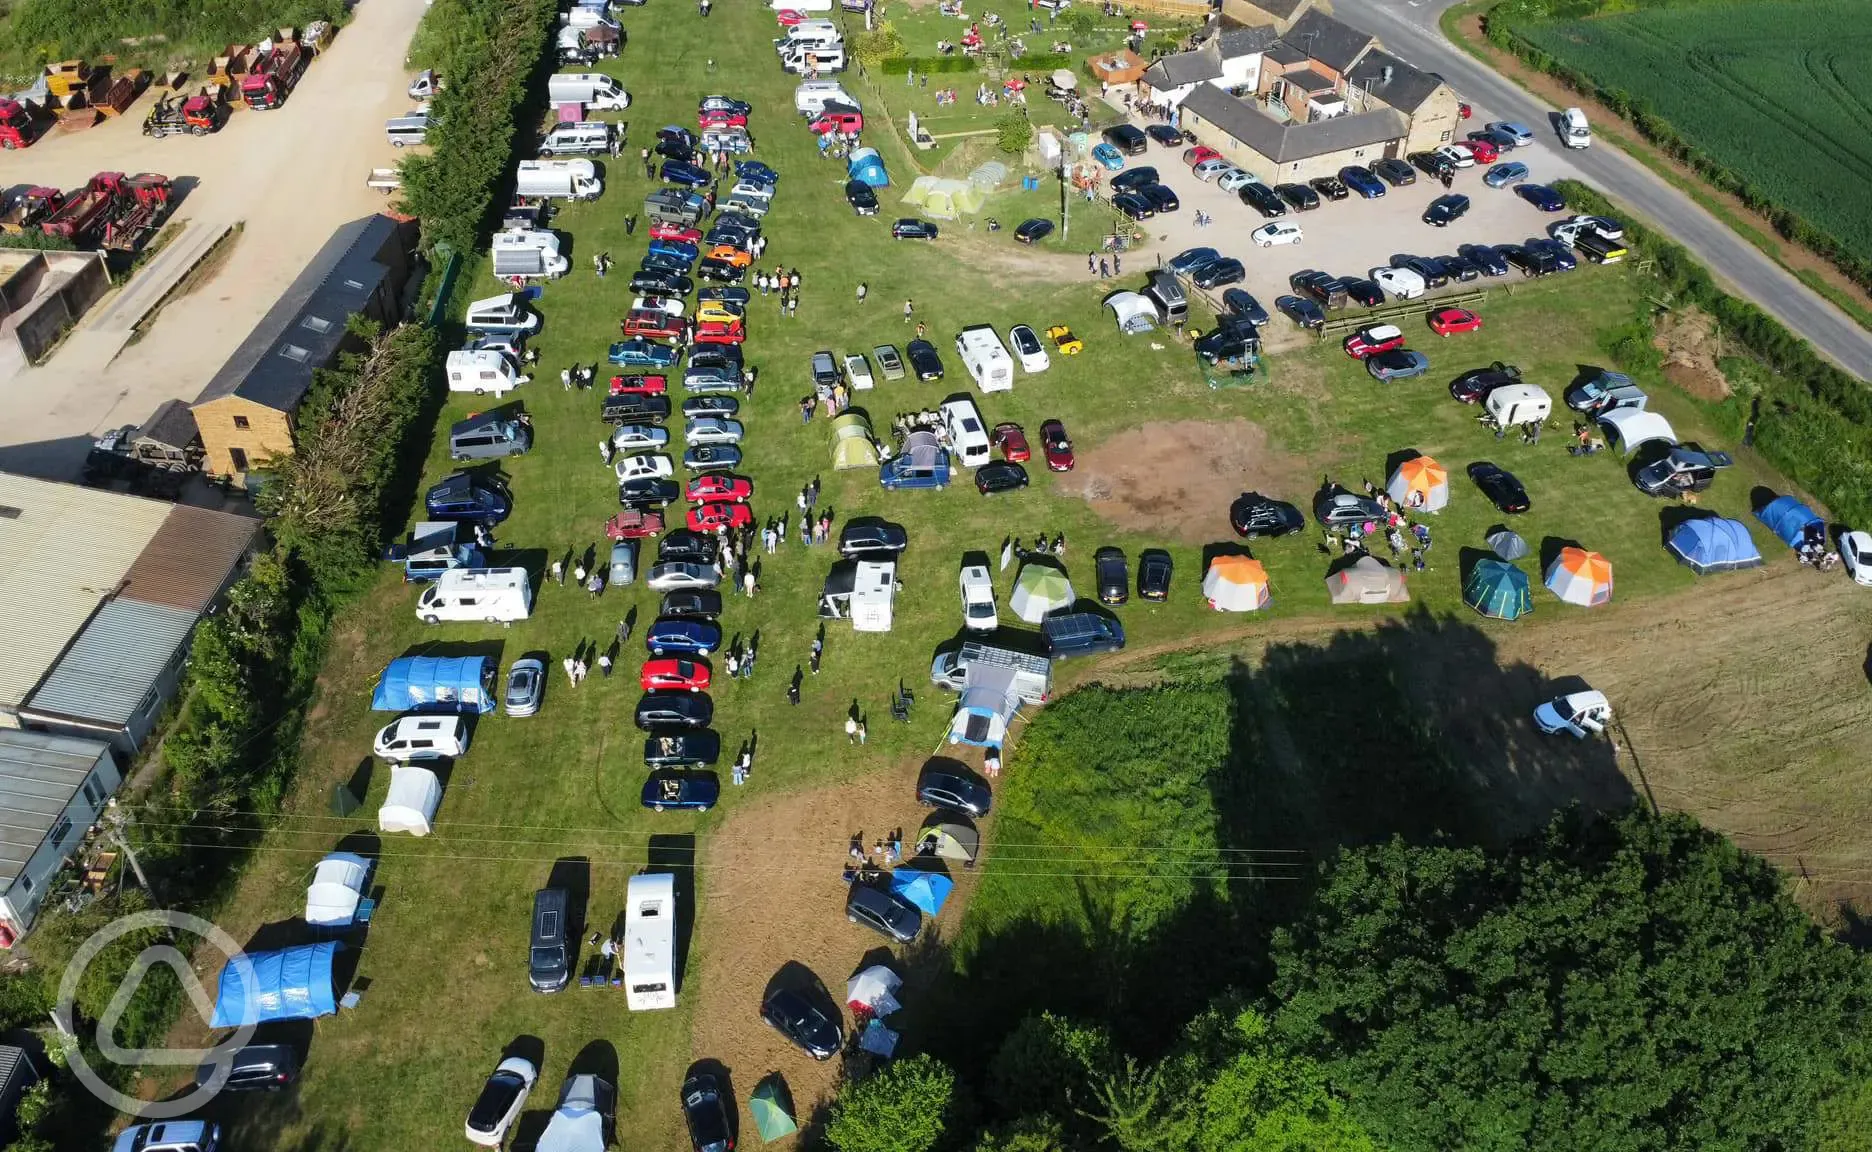 Birdseye view of the campsite during an event